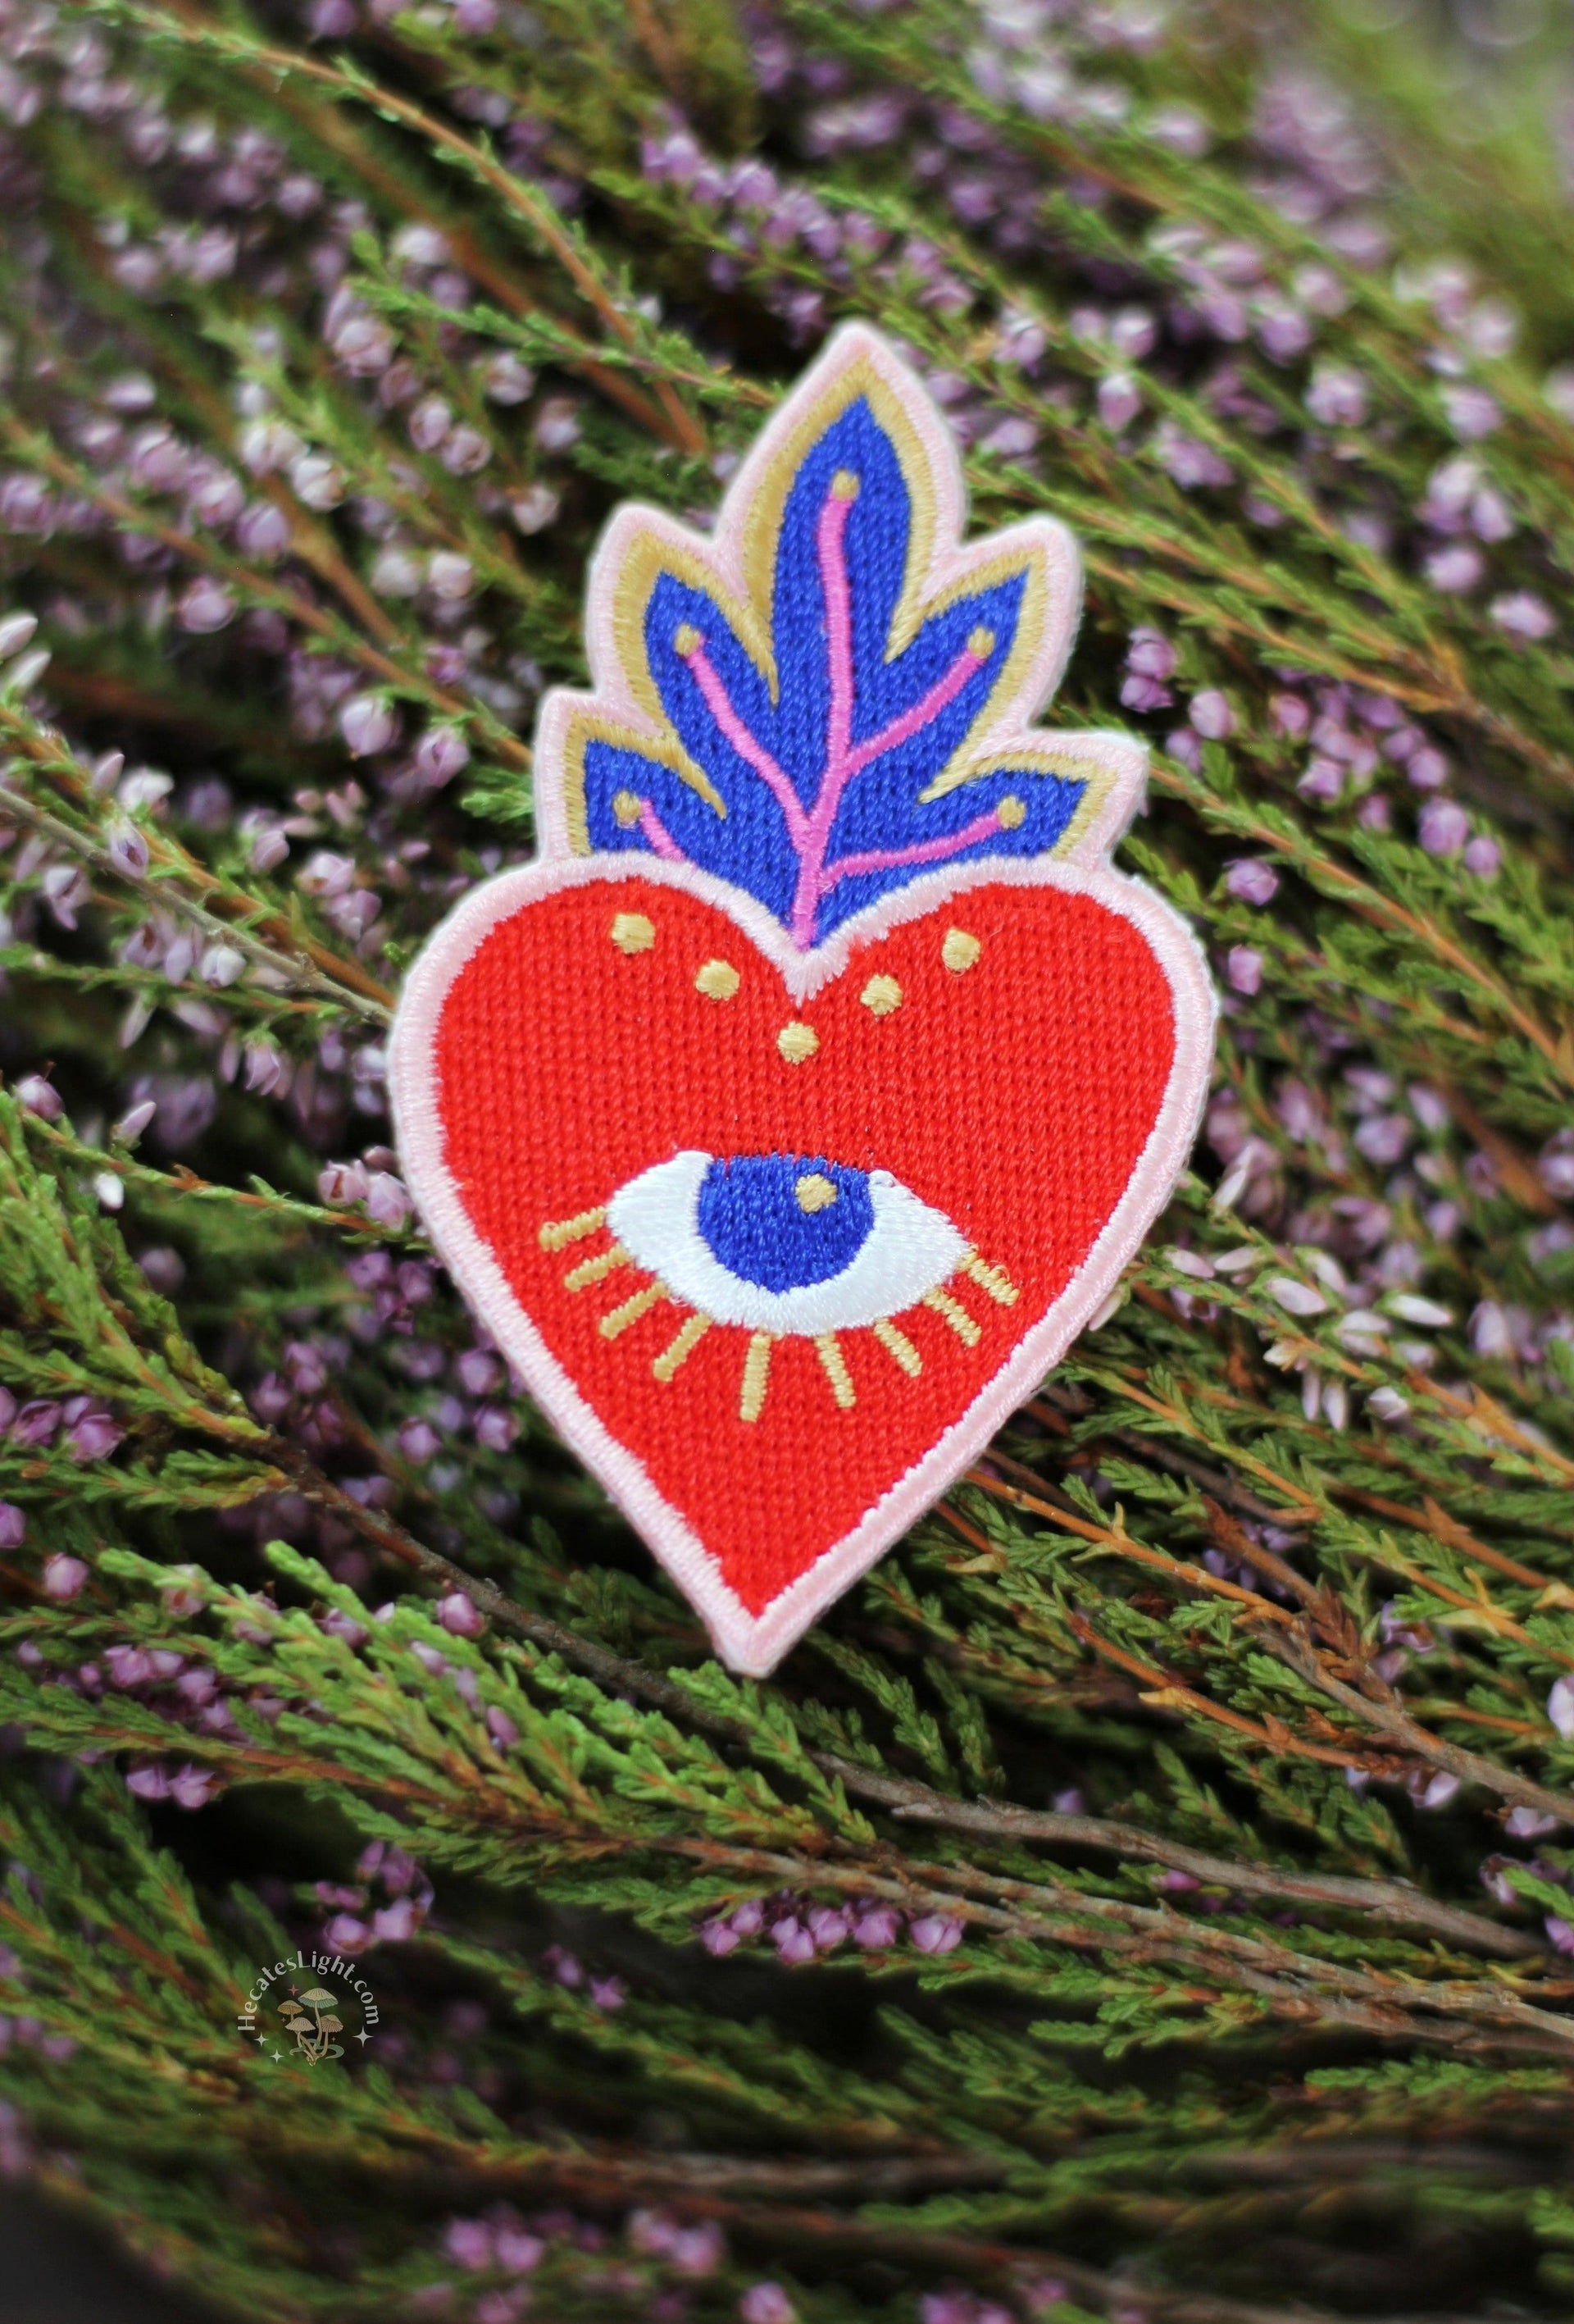 Heart Patch Beads Embroidered Iron on Applique Embellishment 